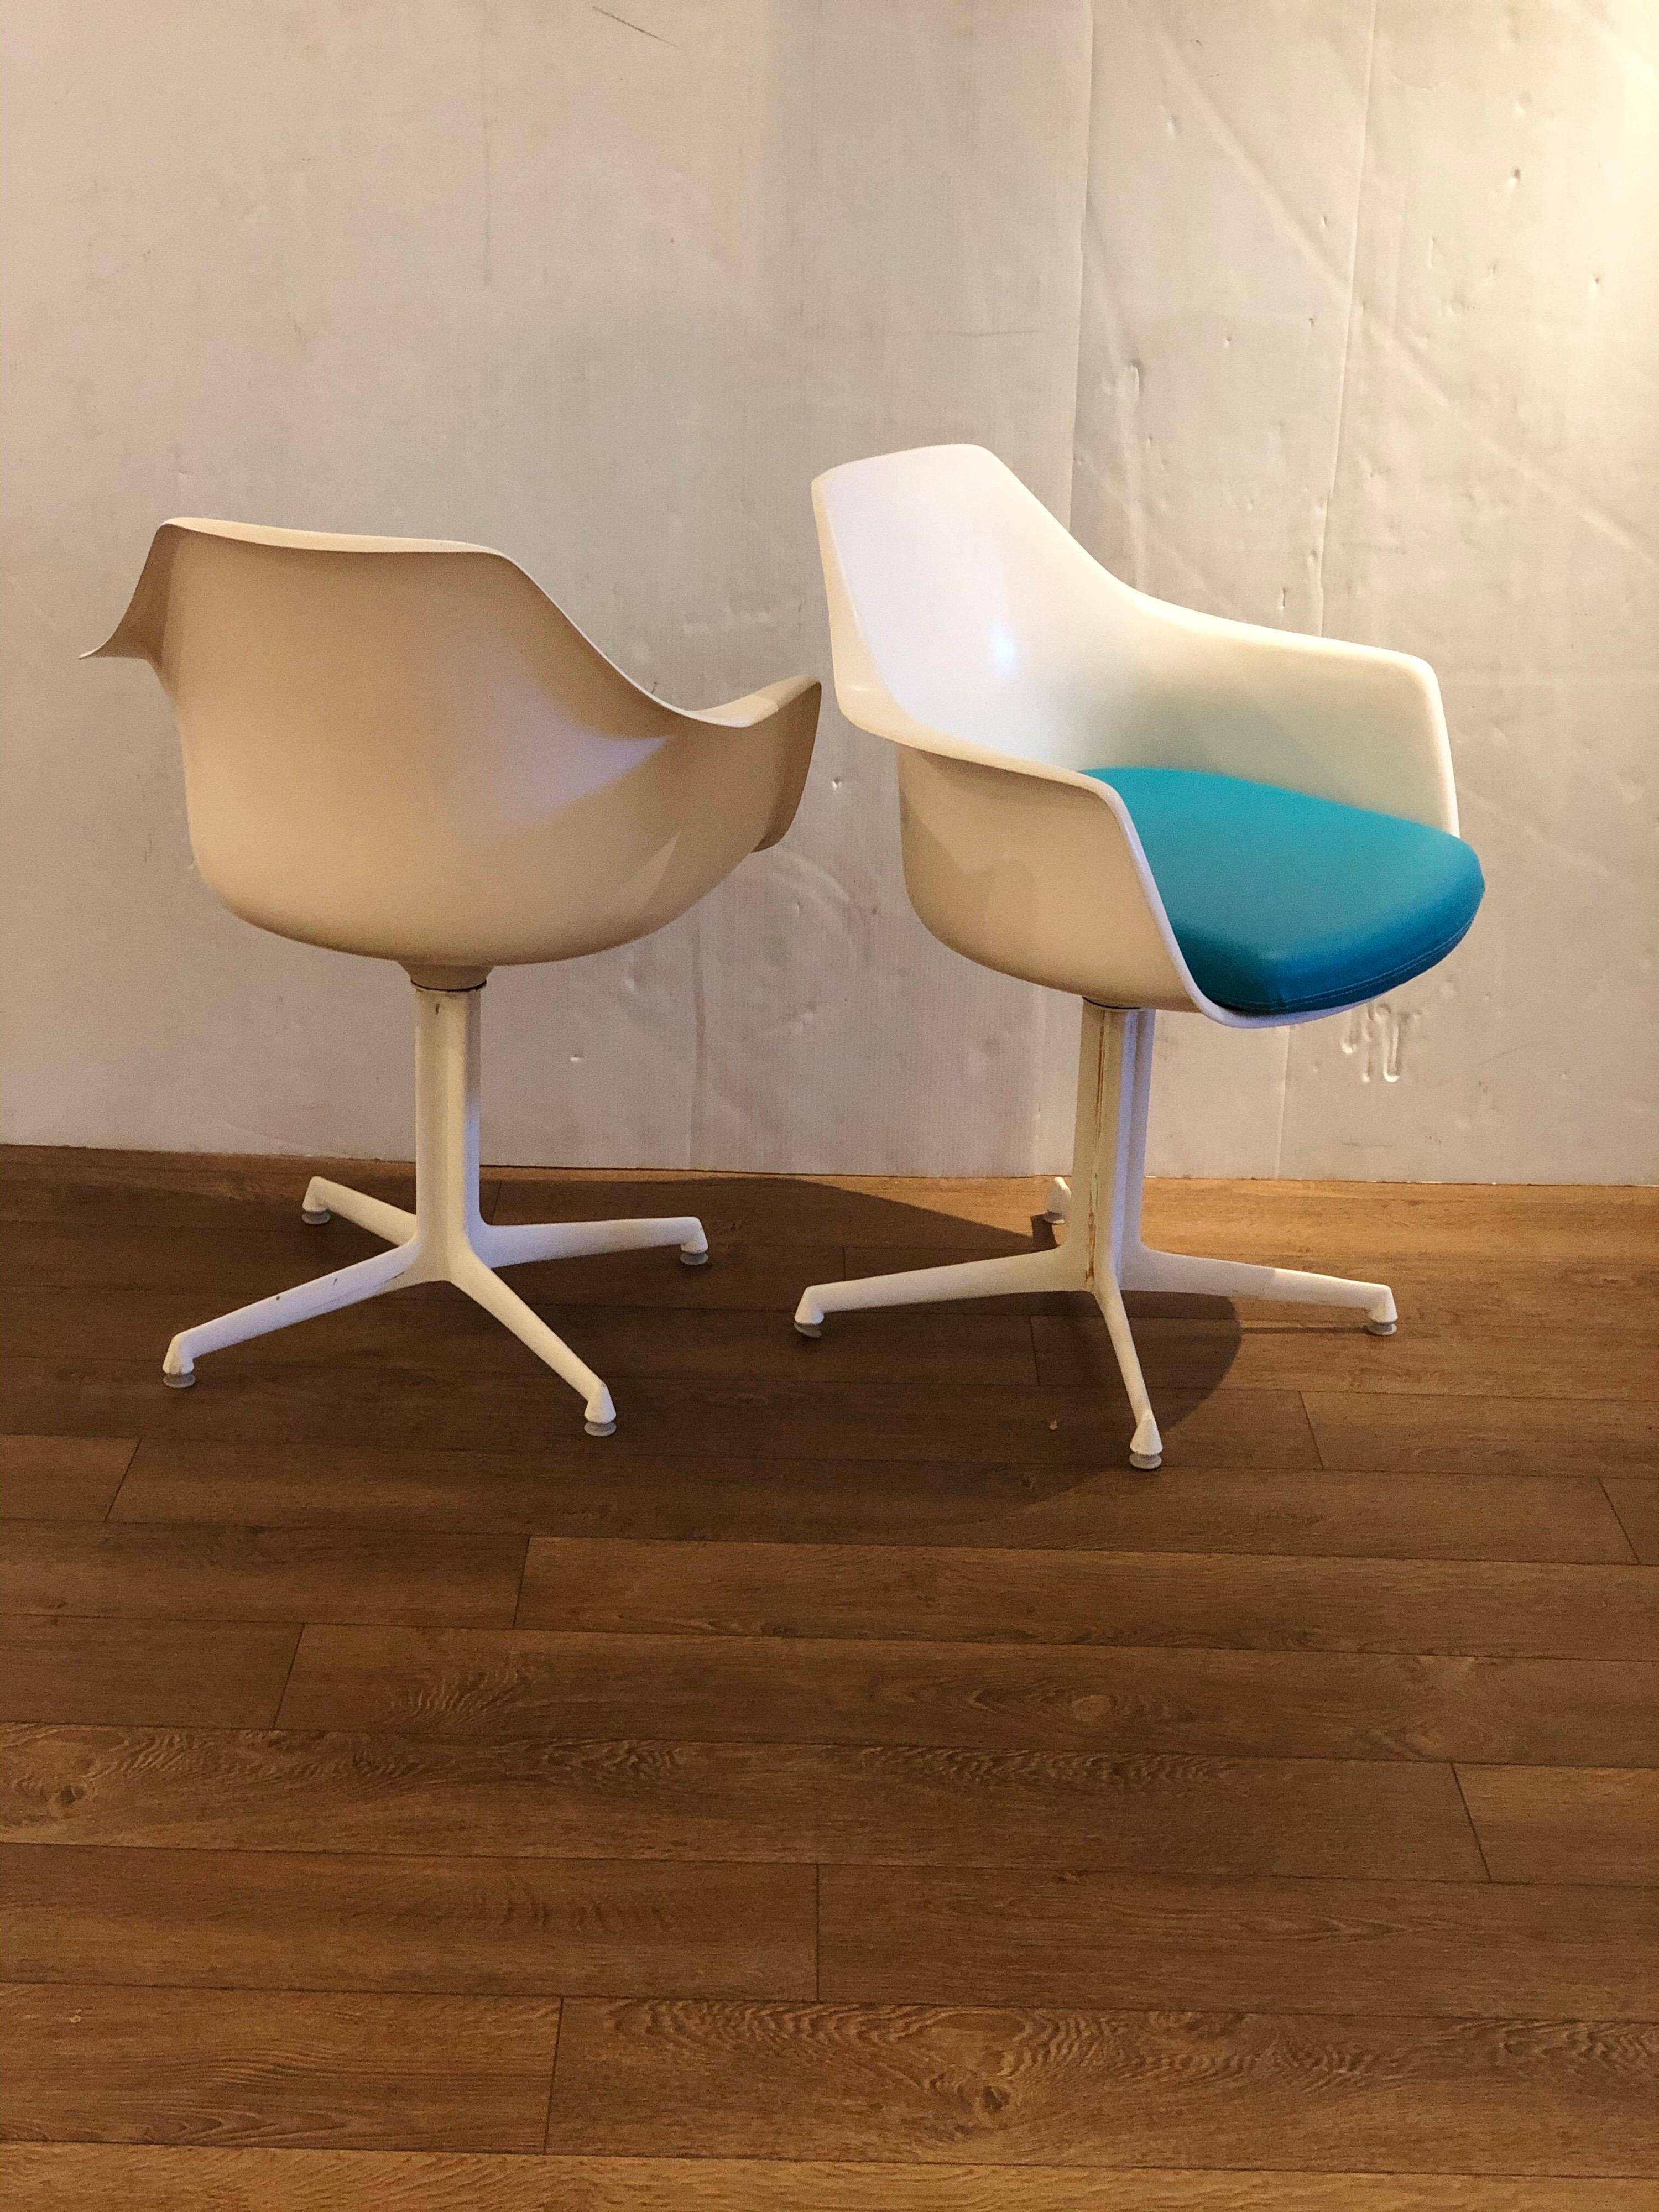 American Rare Pair of Arm Swivel Chairs by Maurice Burke Space Age Era